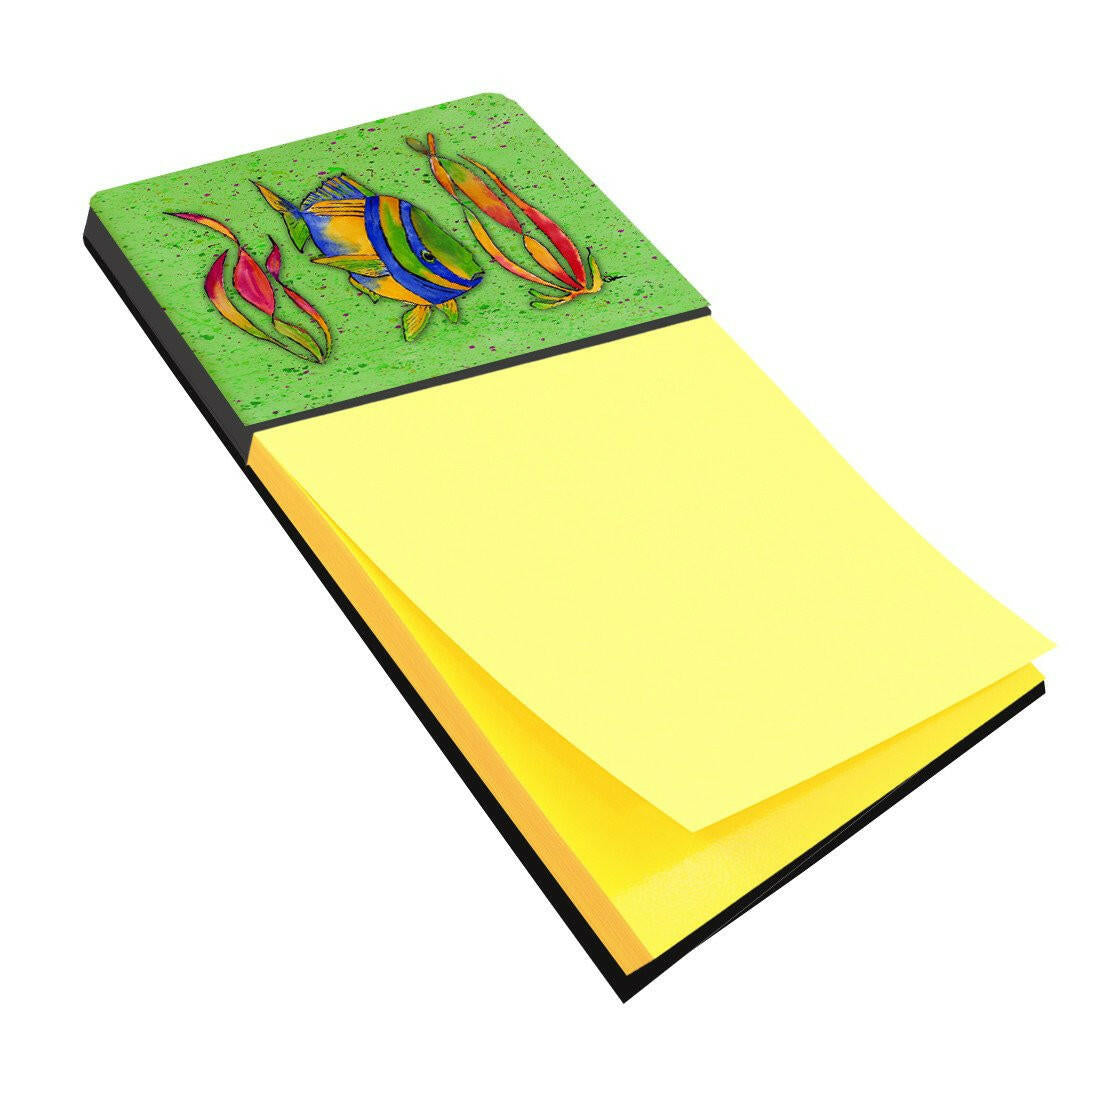 Tropical Fish on Green Refiillable Sticky Note Holder or Postit Note Dispenser 8568SN by Caroline's Treasures